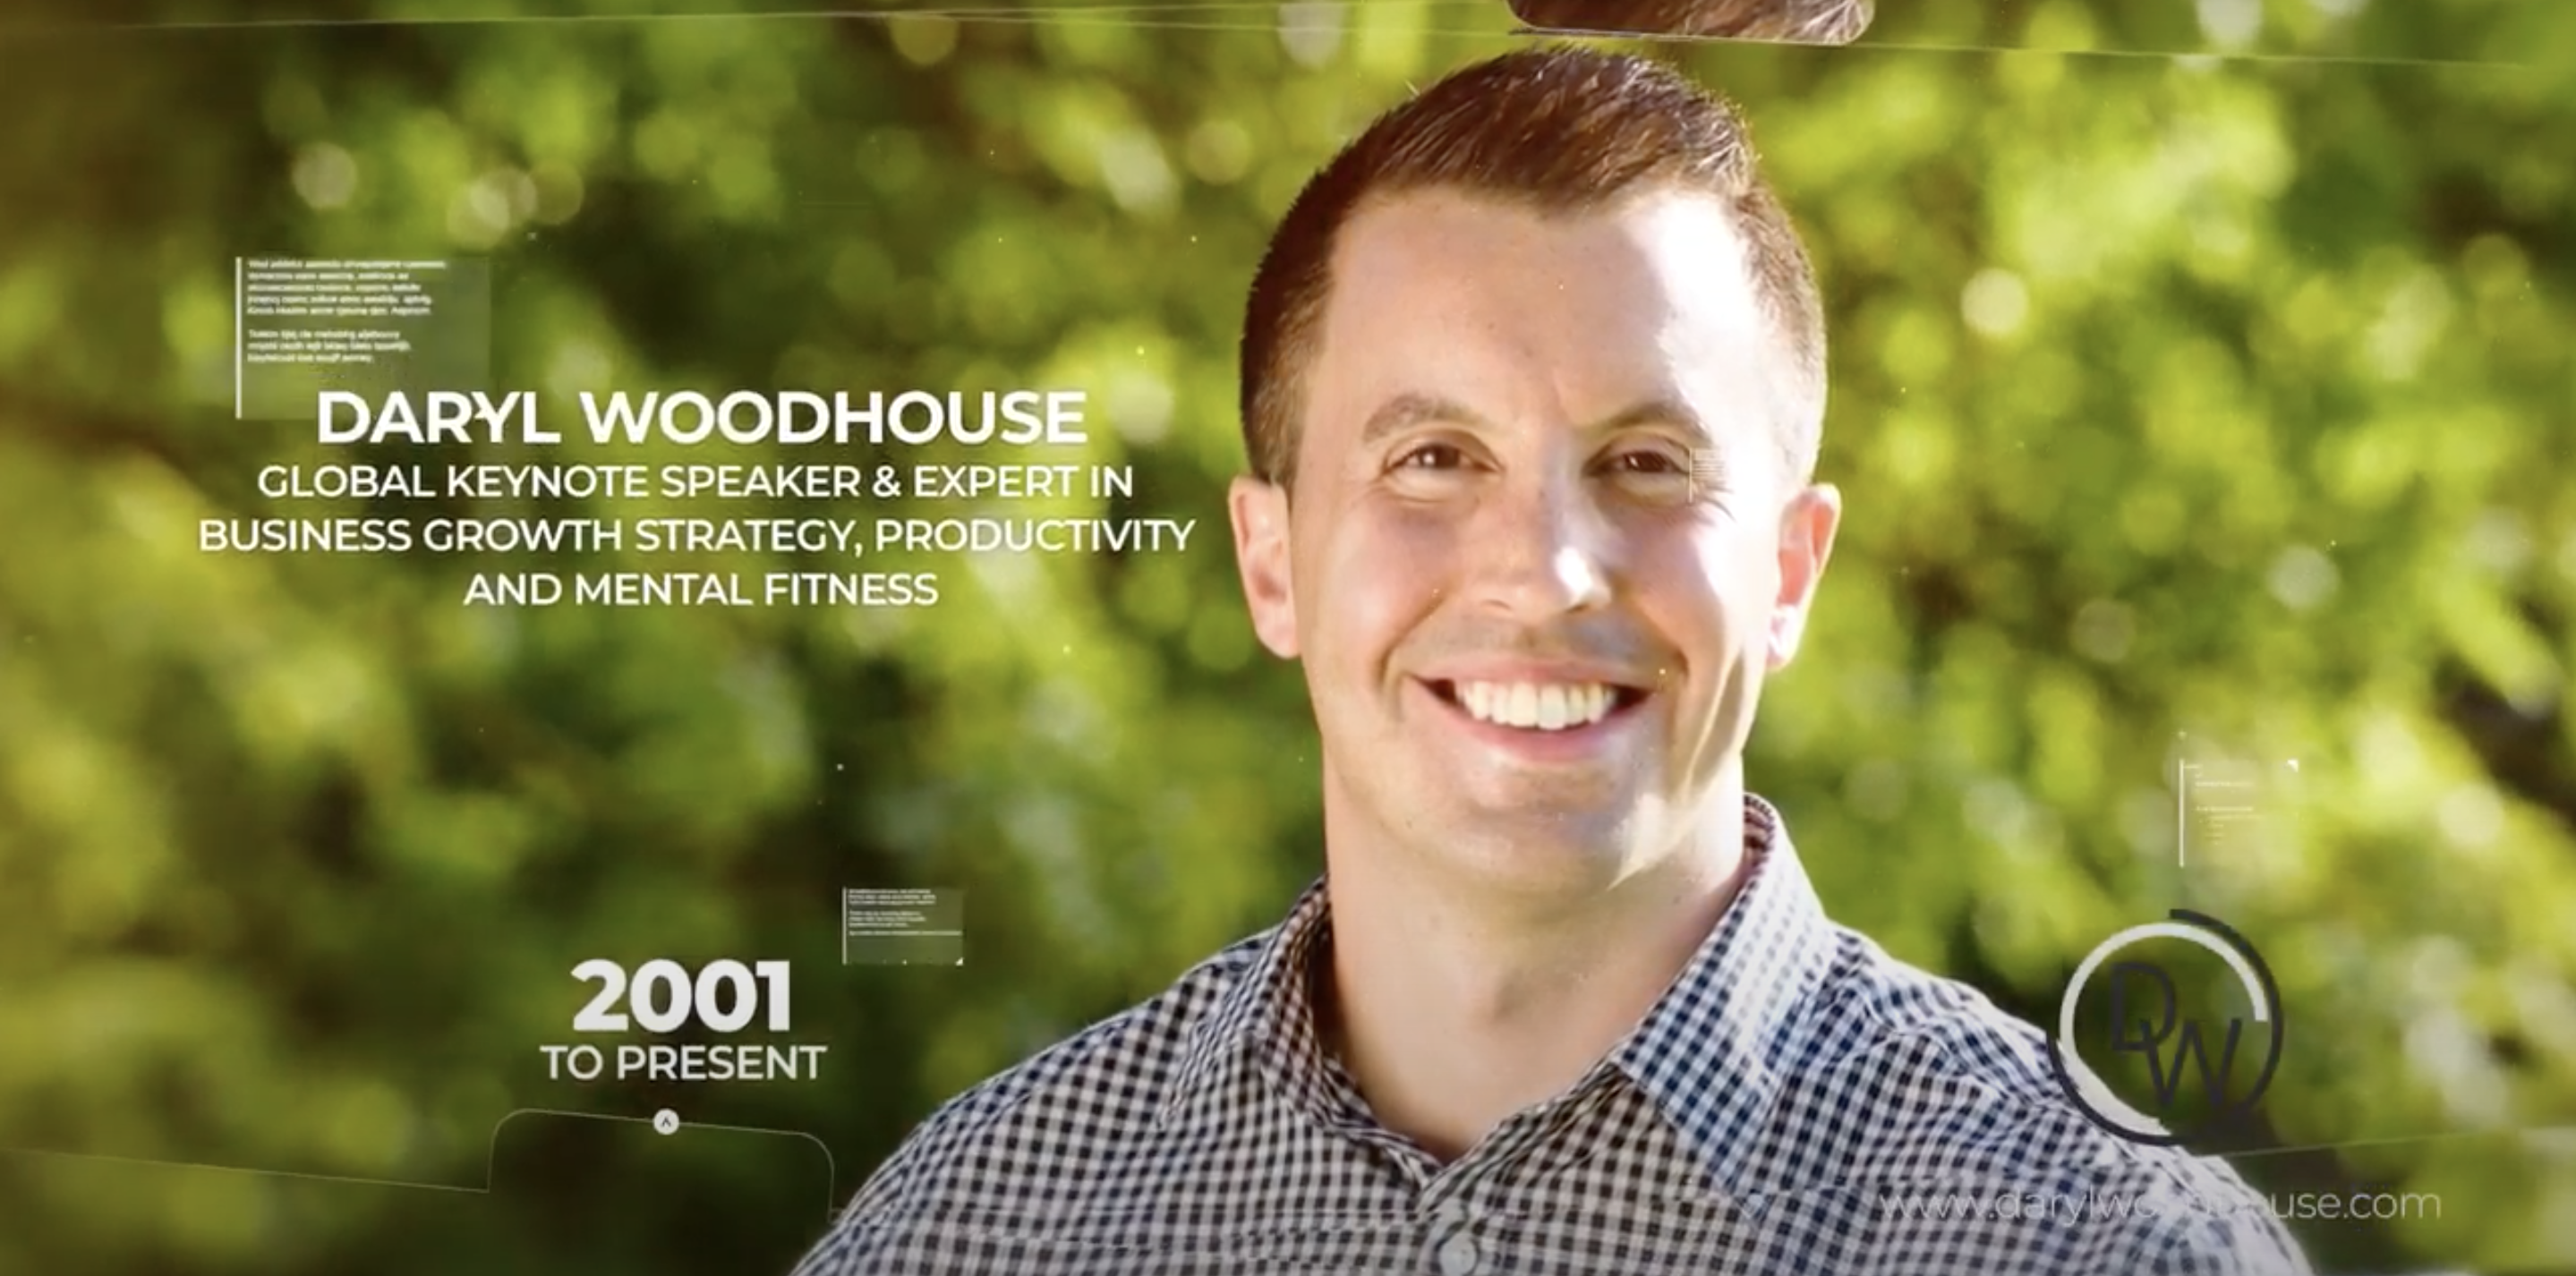 Featured Image For Daryl Woodhouse Event